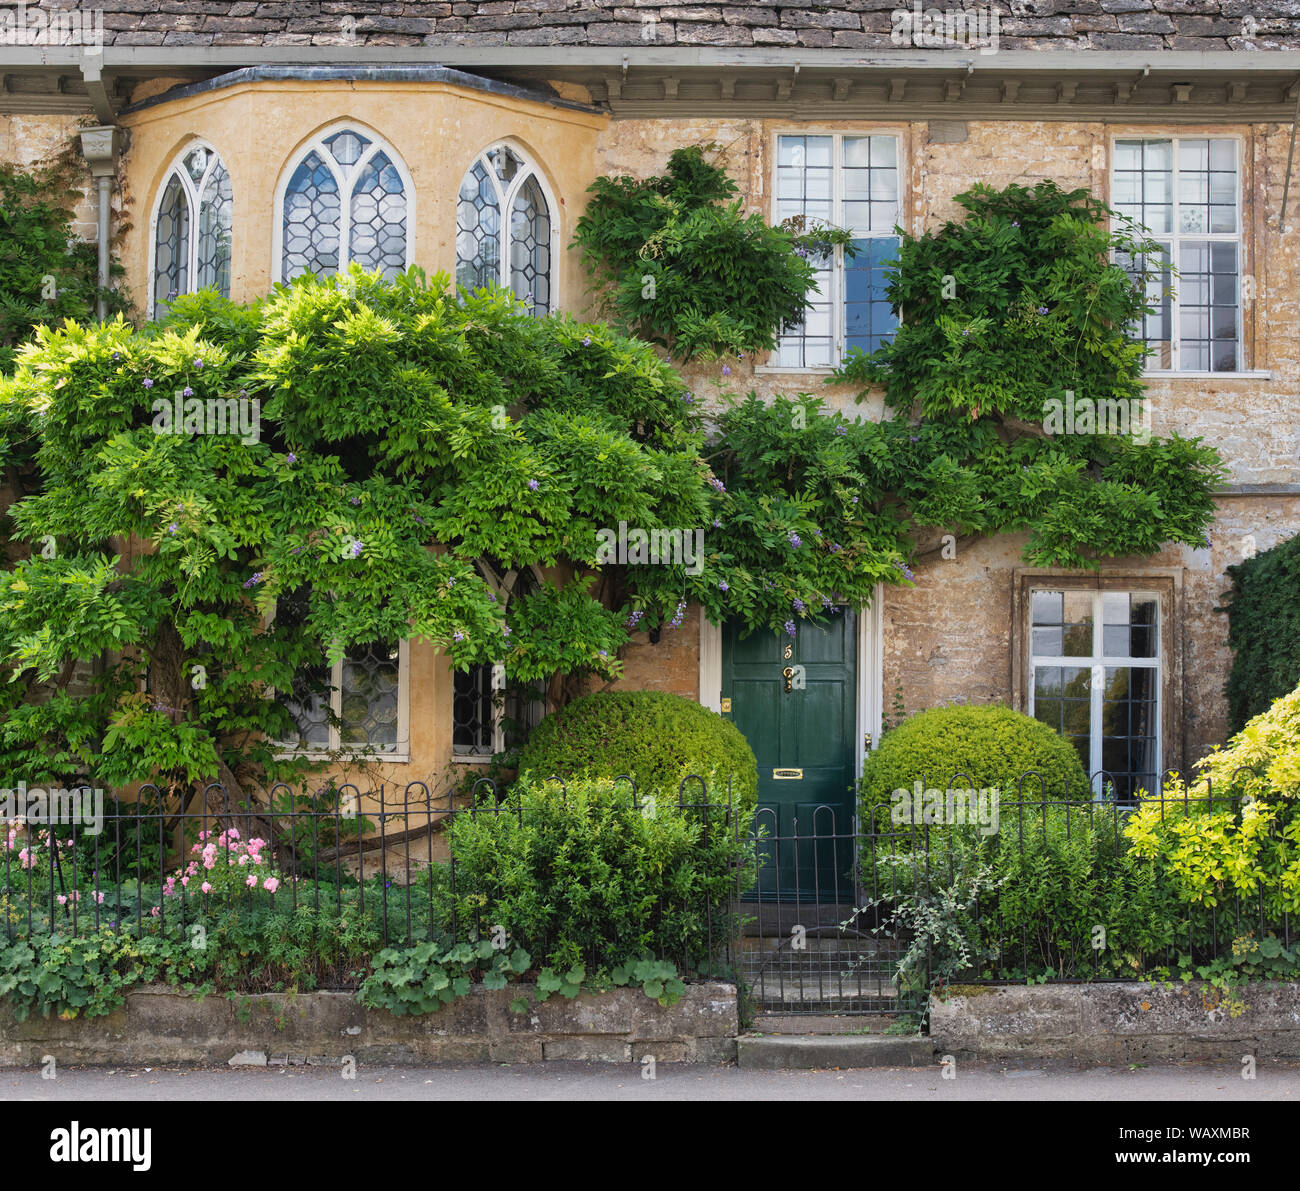 Wisteria foliage covering a house along Cecily hill, Cirencester, Cotswolds, Gloucestershire, England Stock Photo